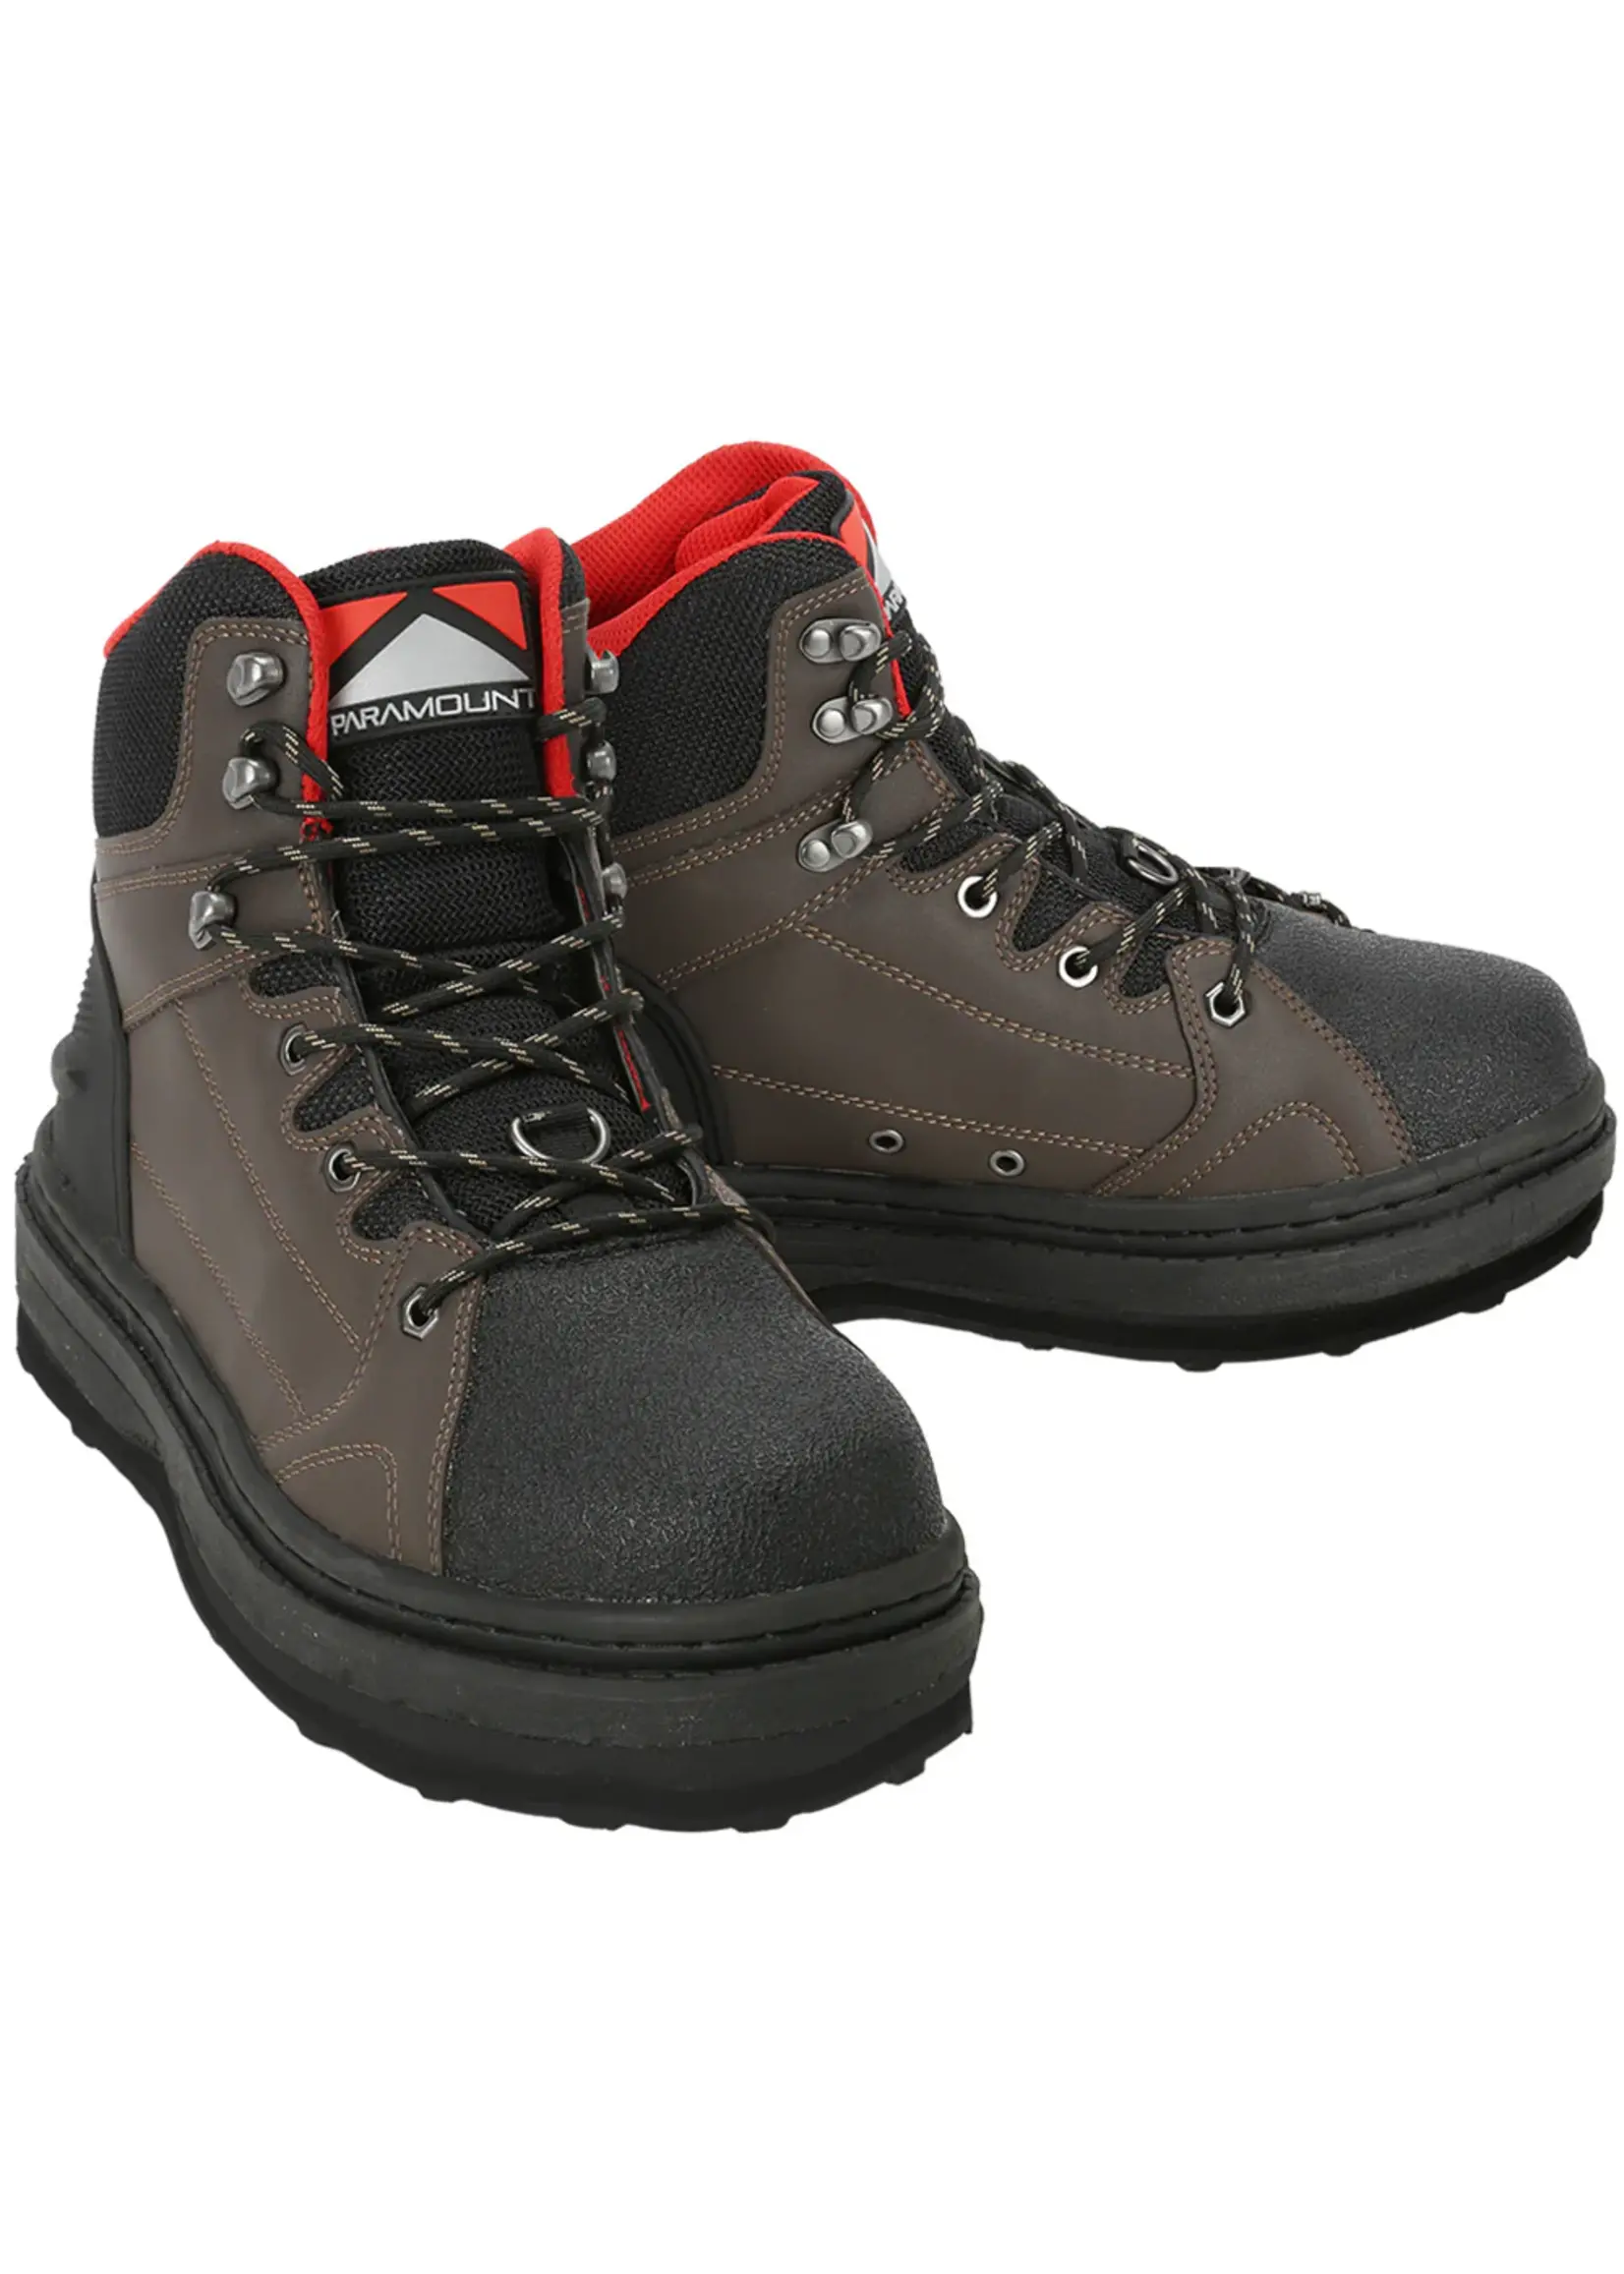 Paramount Paramount Deep Eddy Rock Jam Cleated Sole Wading Shoe